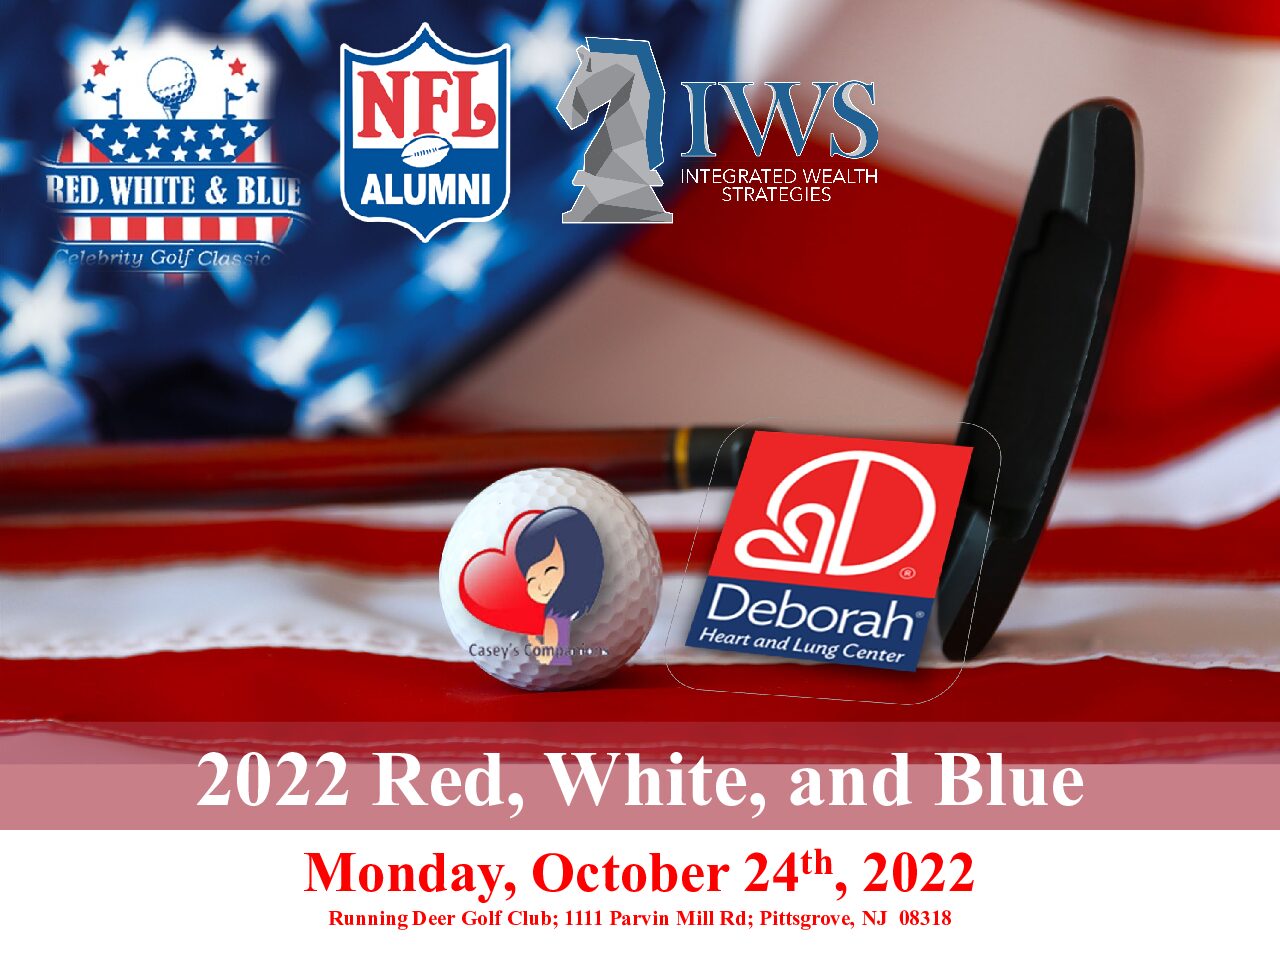 Integrated Wealth Strategies Partners with NFLA to host Red White and Blue Golf tournament in October